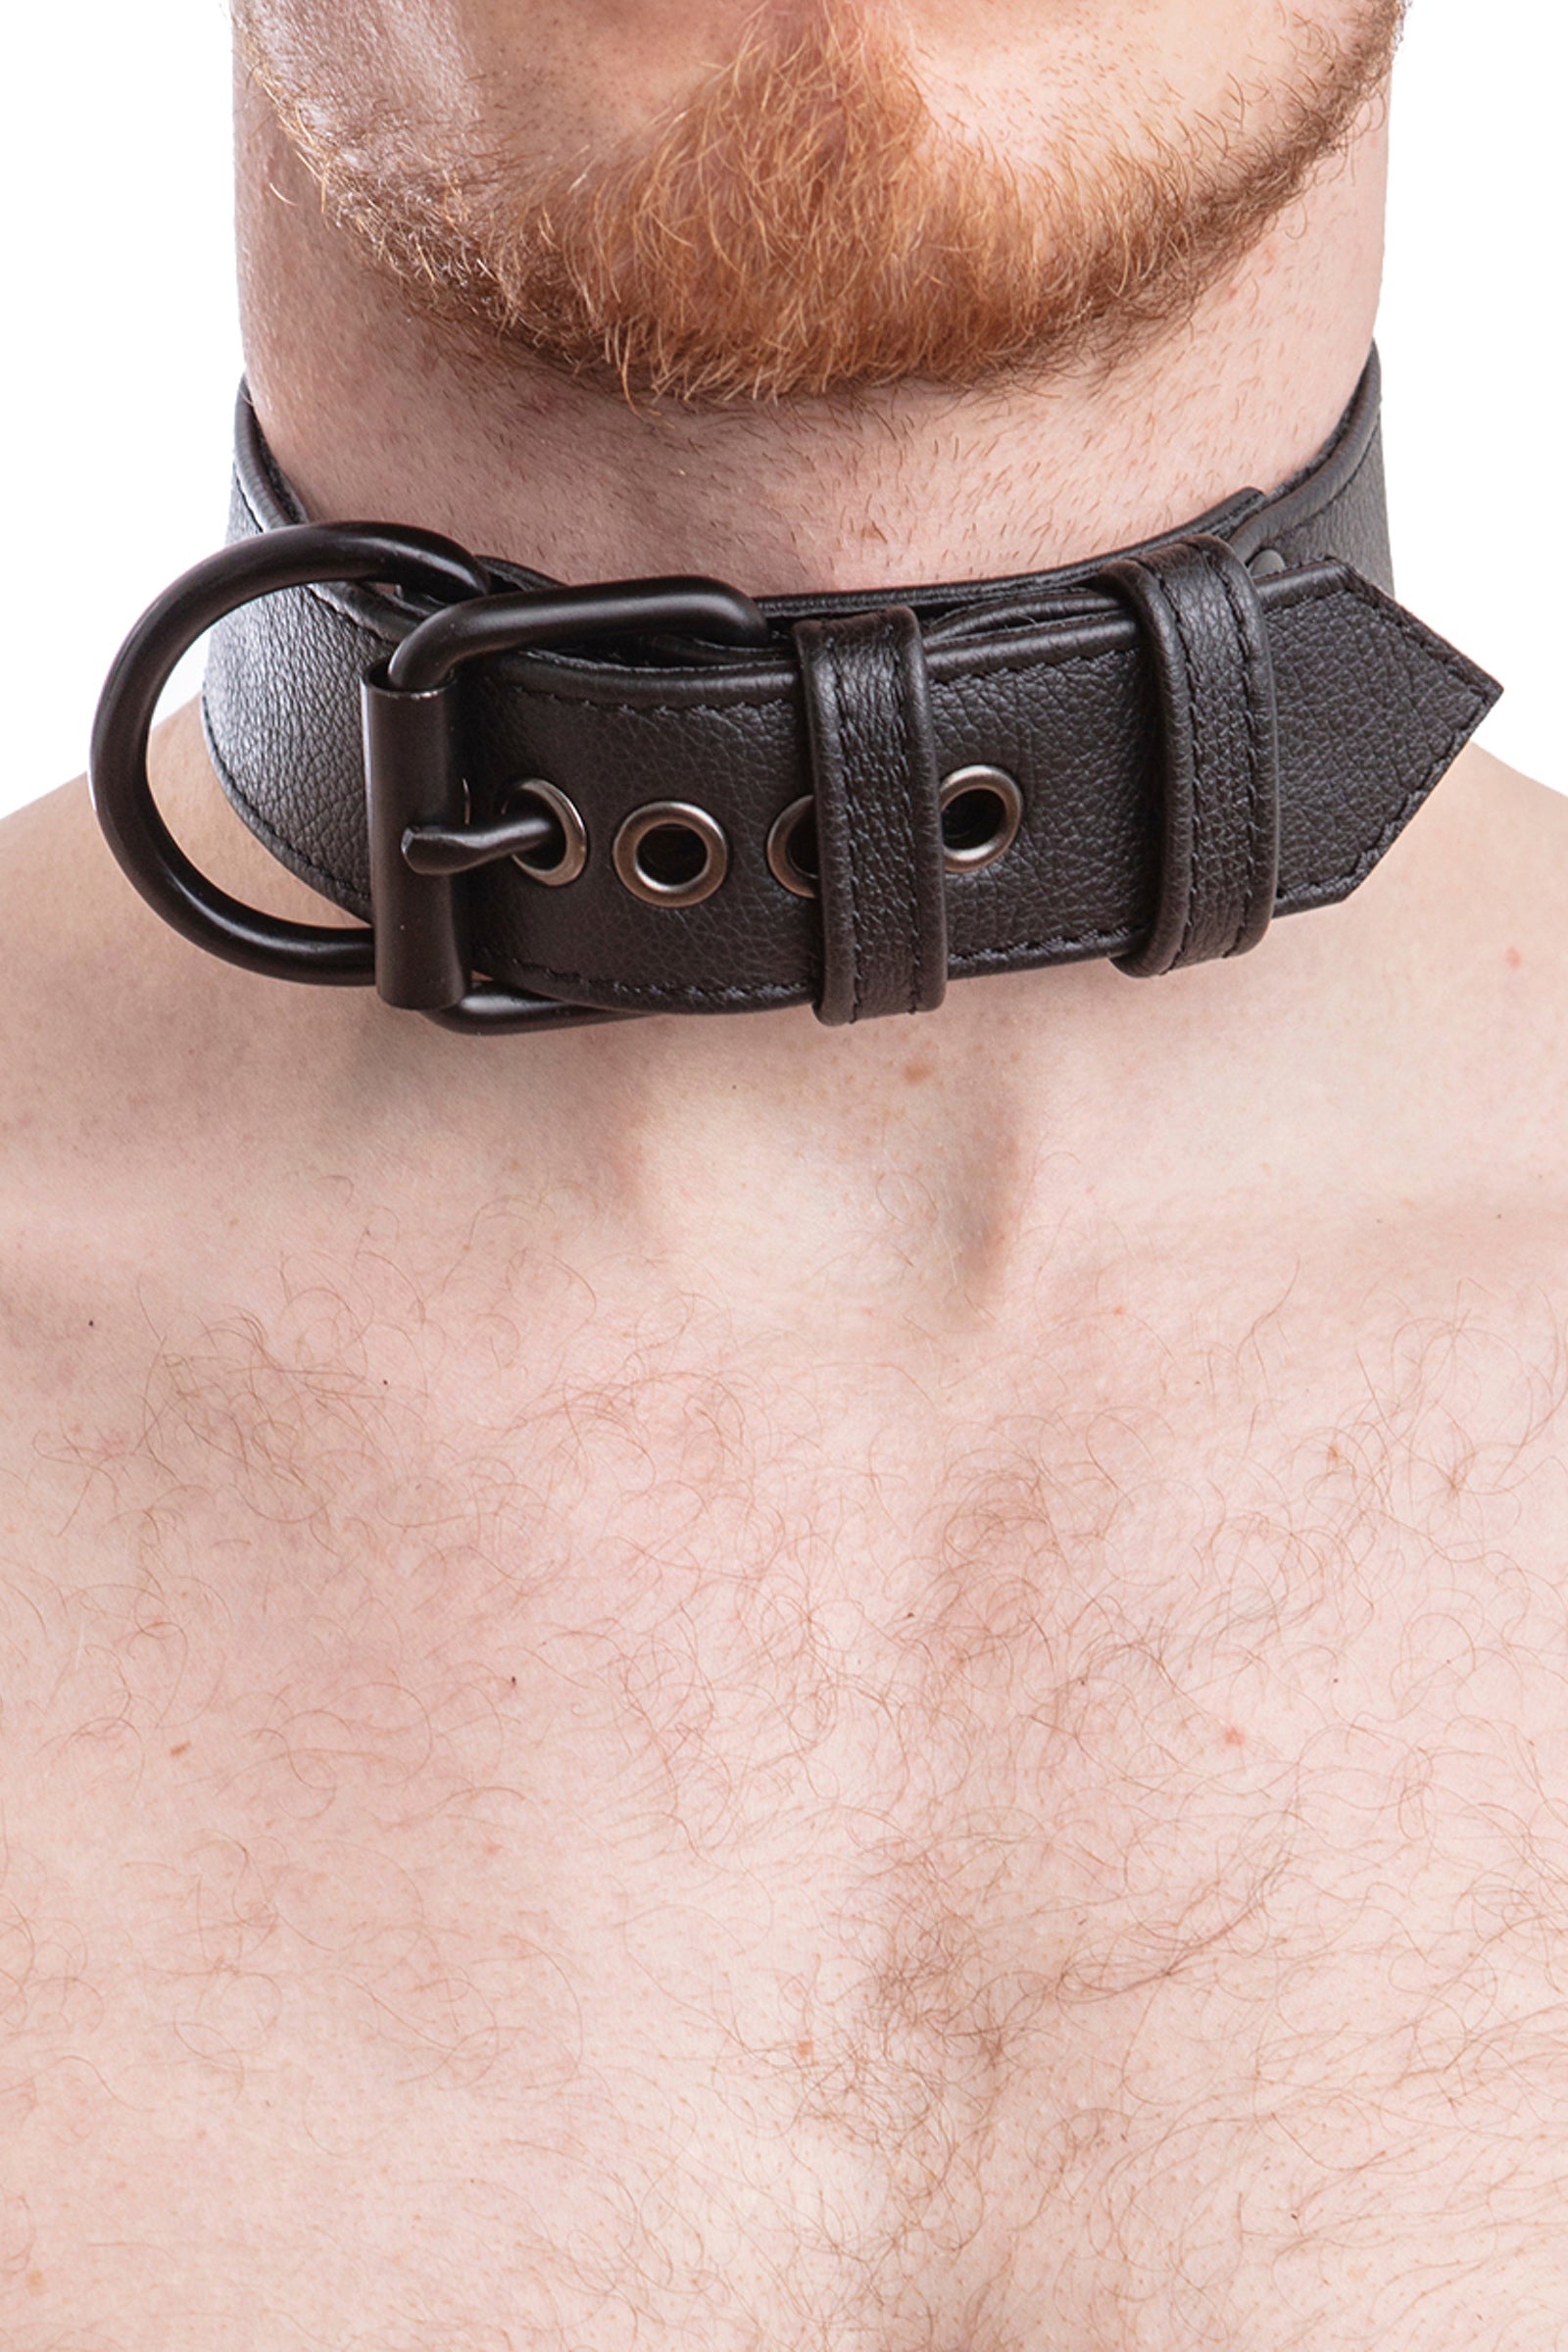 Black Leather Pup Collar, Get Your Kink ON!